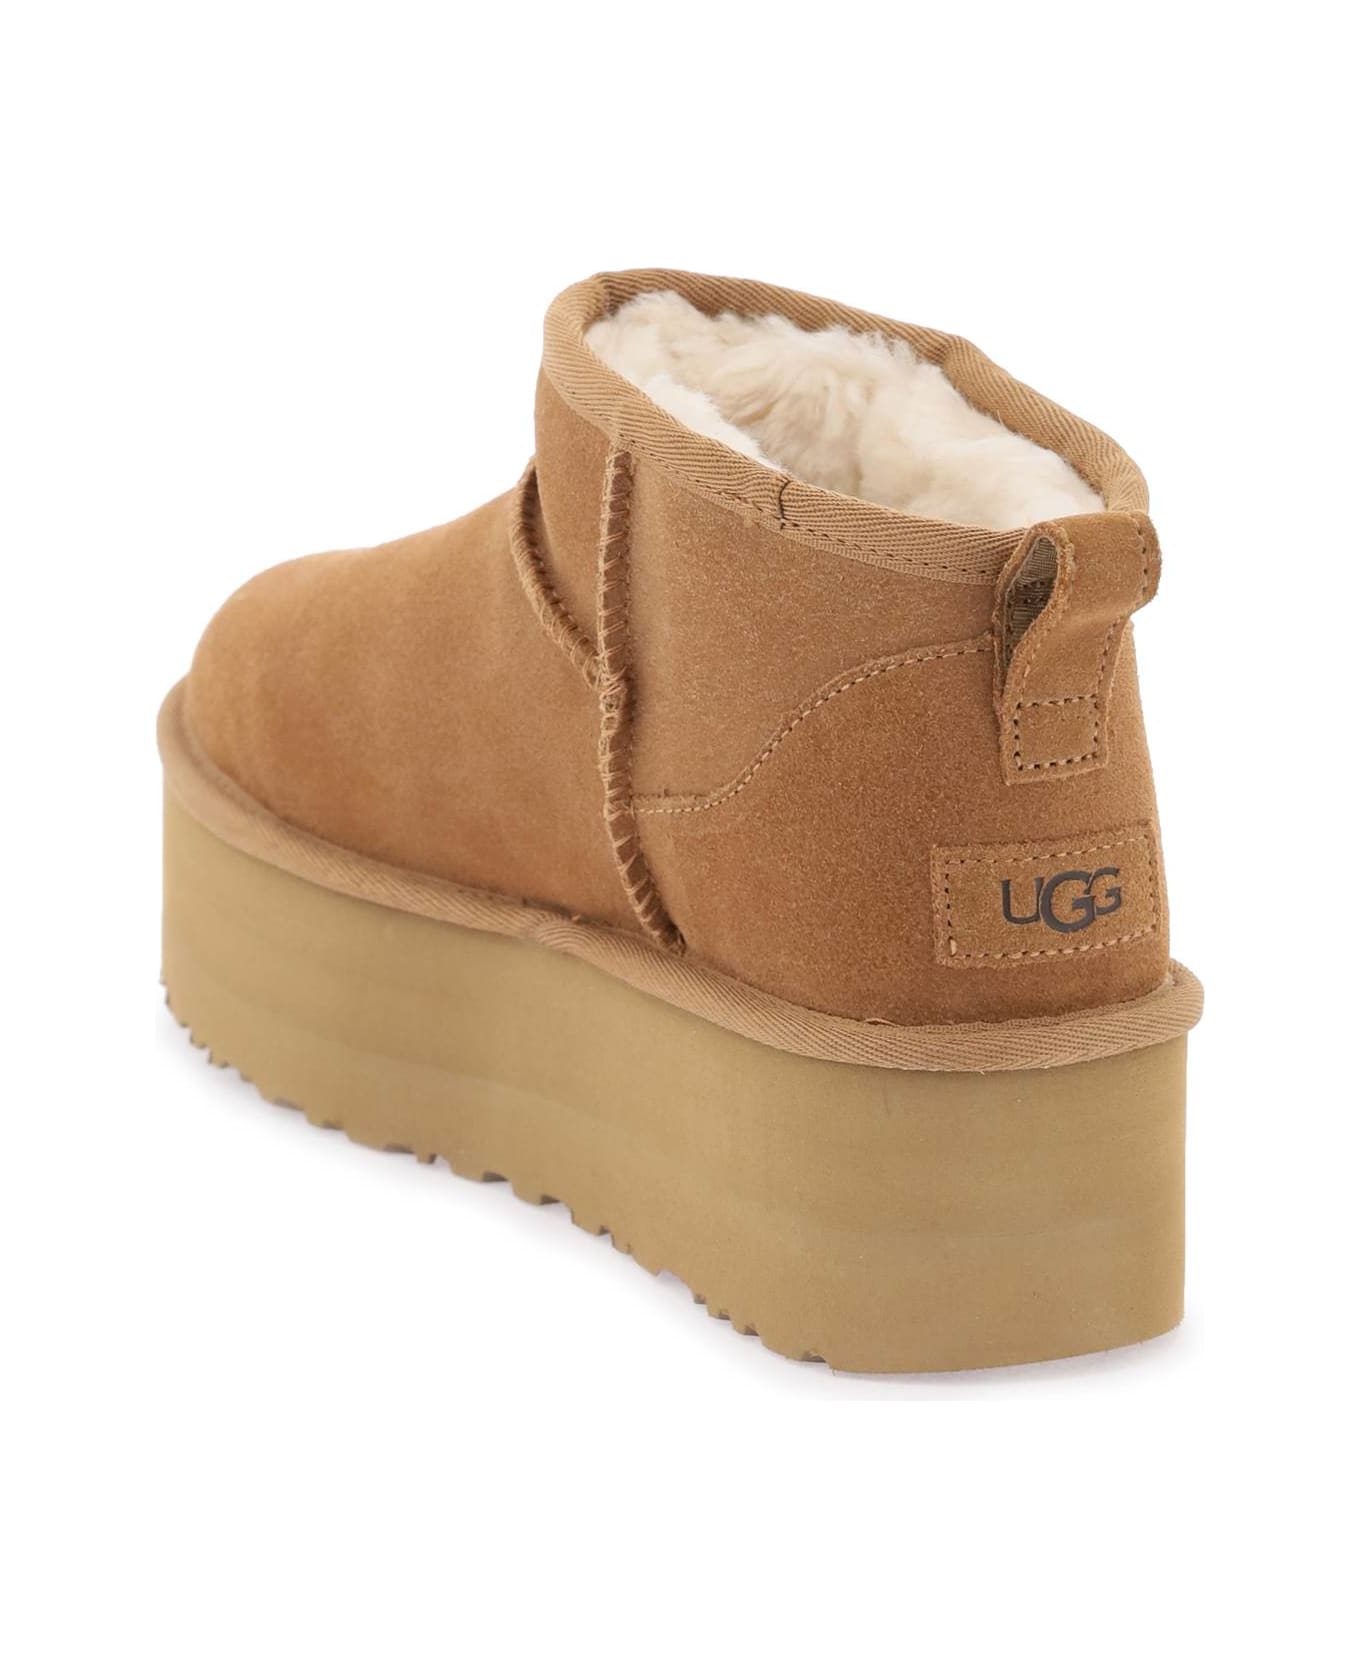 UGG Classic Ultra Mini Platform Ankle Boots - Che Chestnut